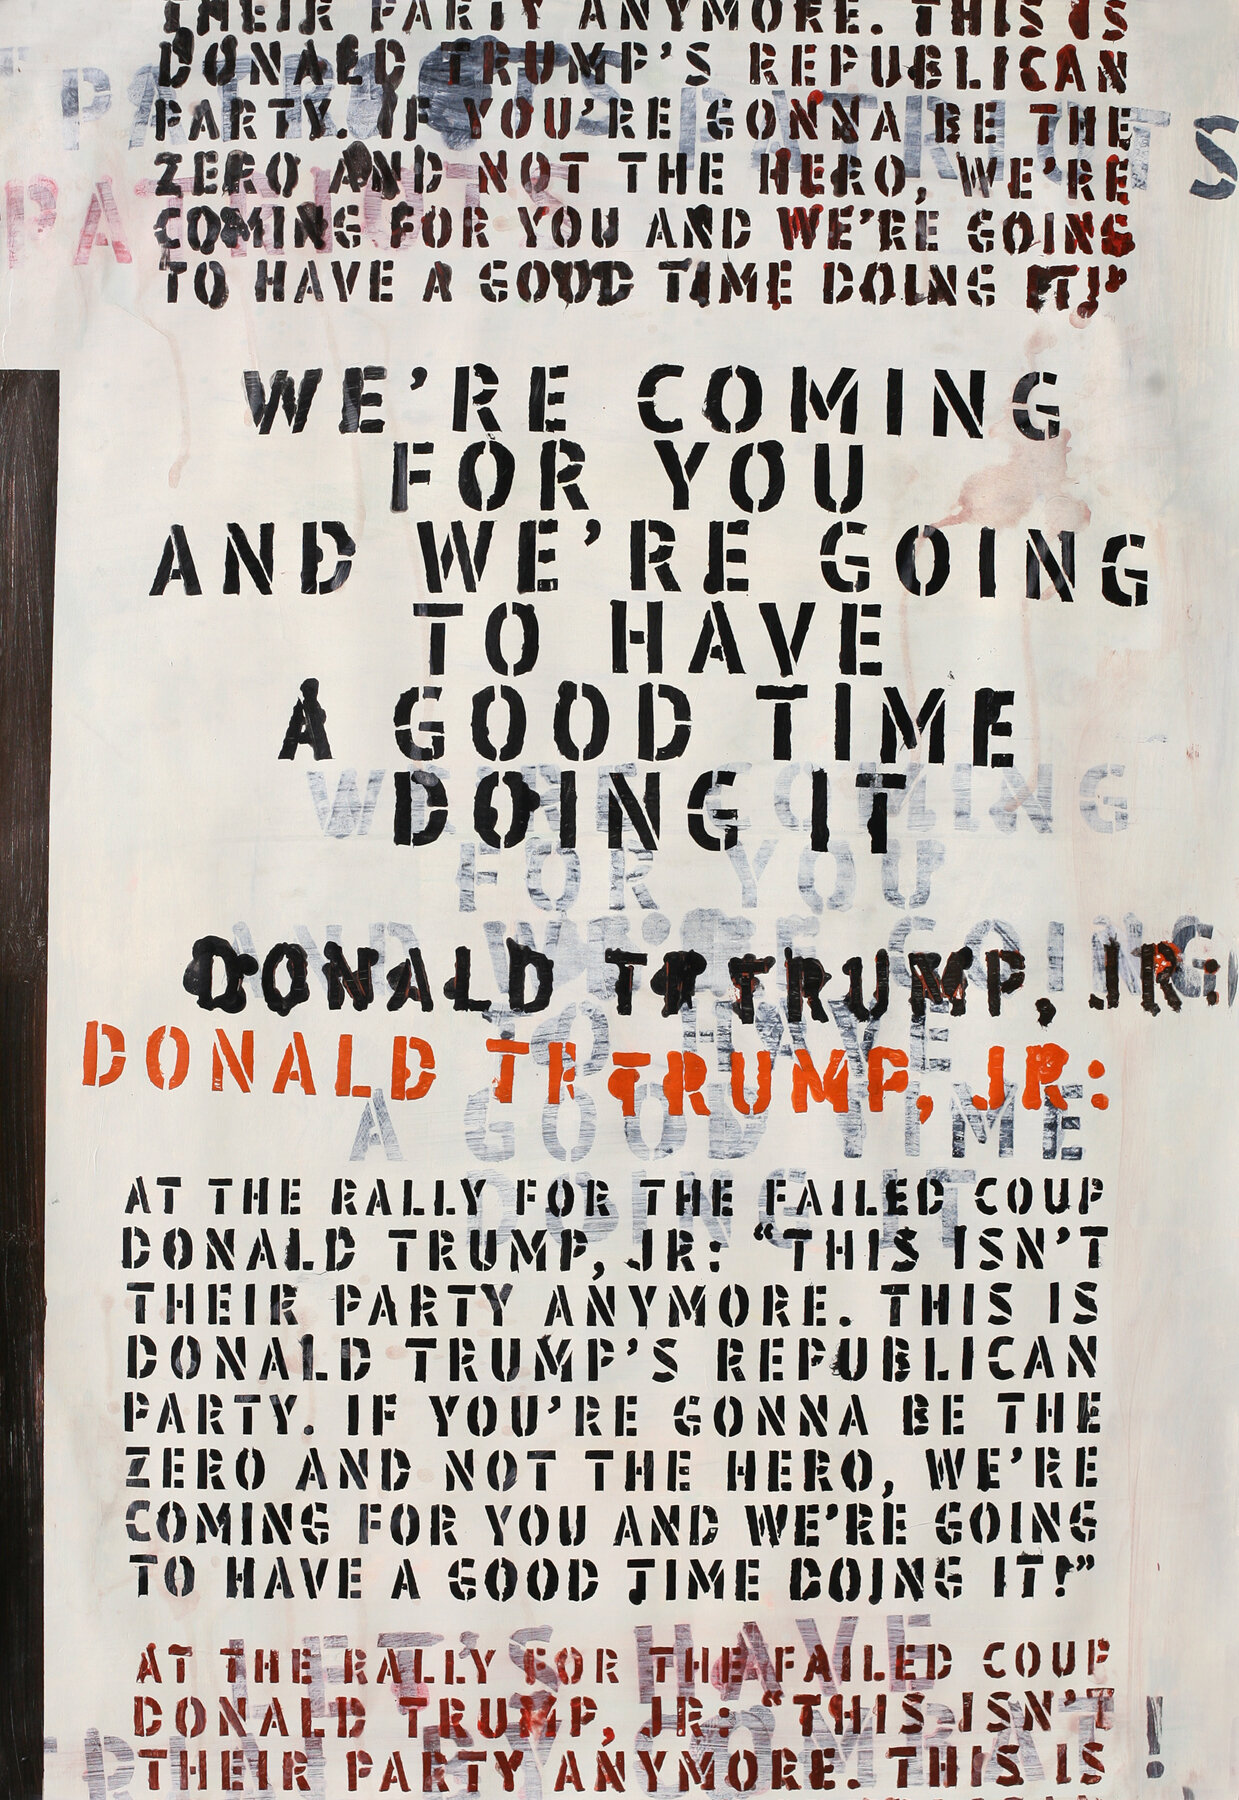 "We're coming for you..." Donald Trump, Jr.